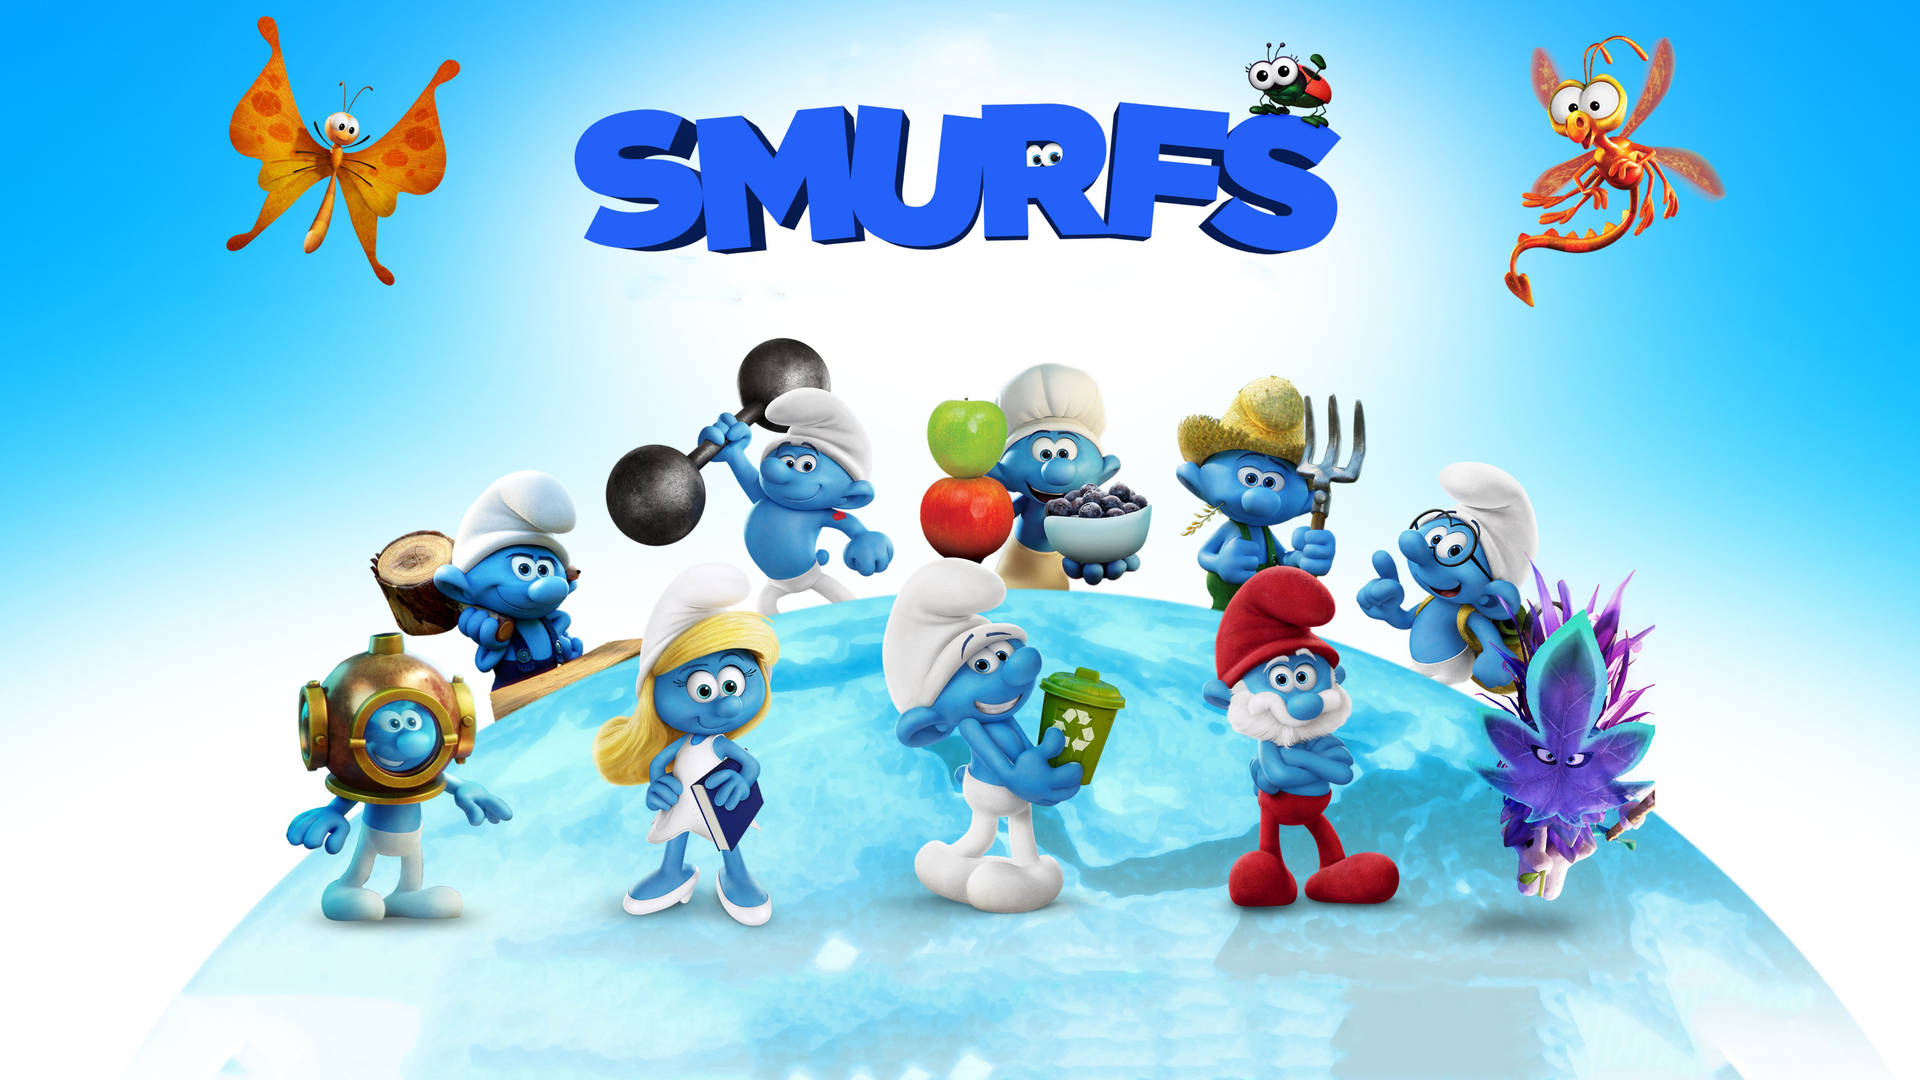 The Smurfs 2017 Film Poster Background